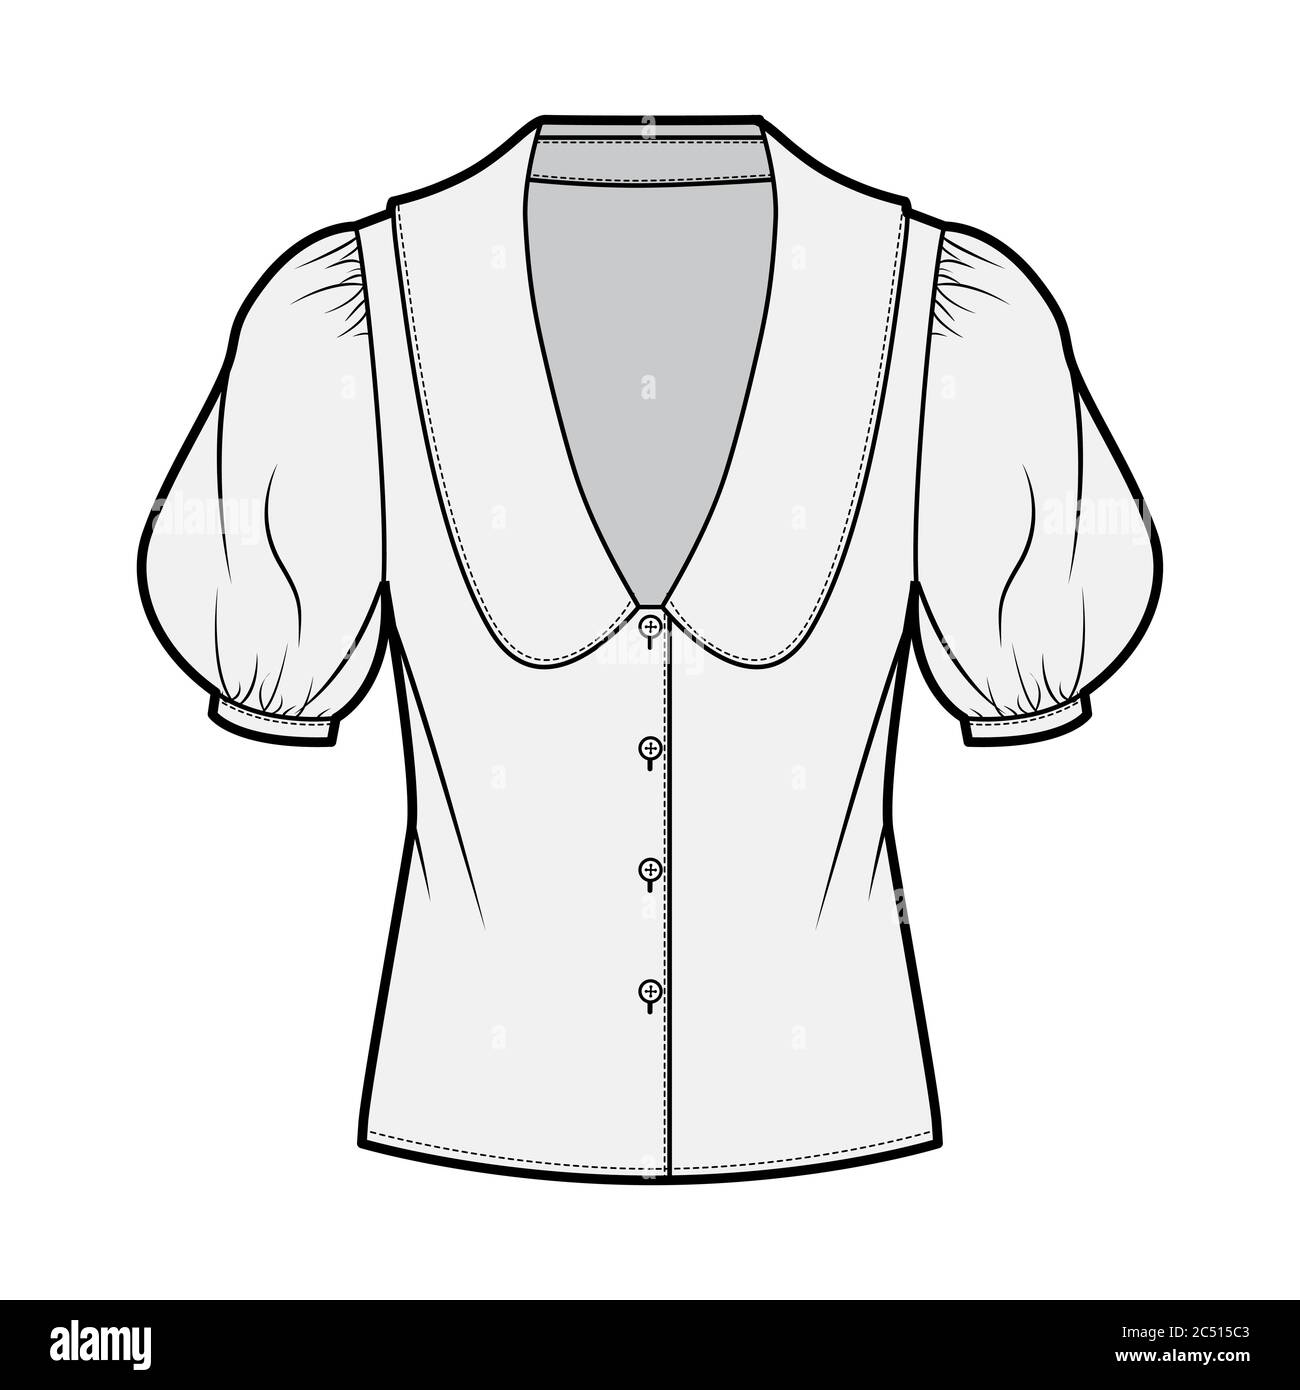 Blouse technical fashion illustration with collar framing the plunging V neck, oversized medium puffed sleeves and body. Flat apparel template front grey color. Women, men unisex garment CAD mockup Stock Vector